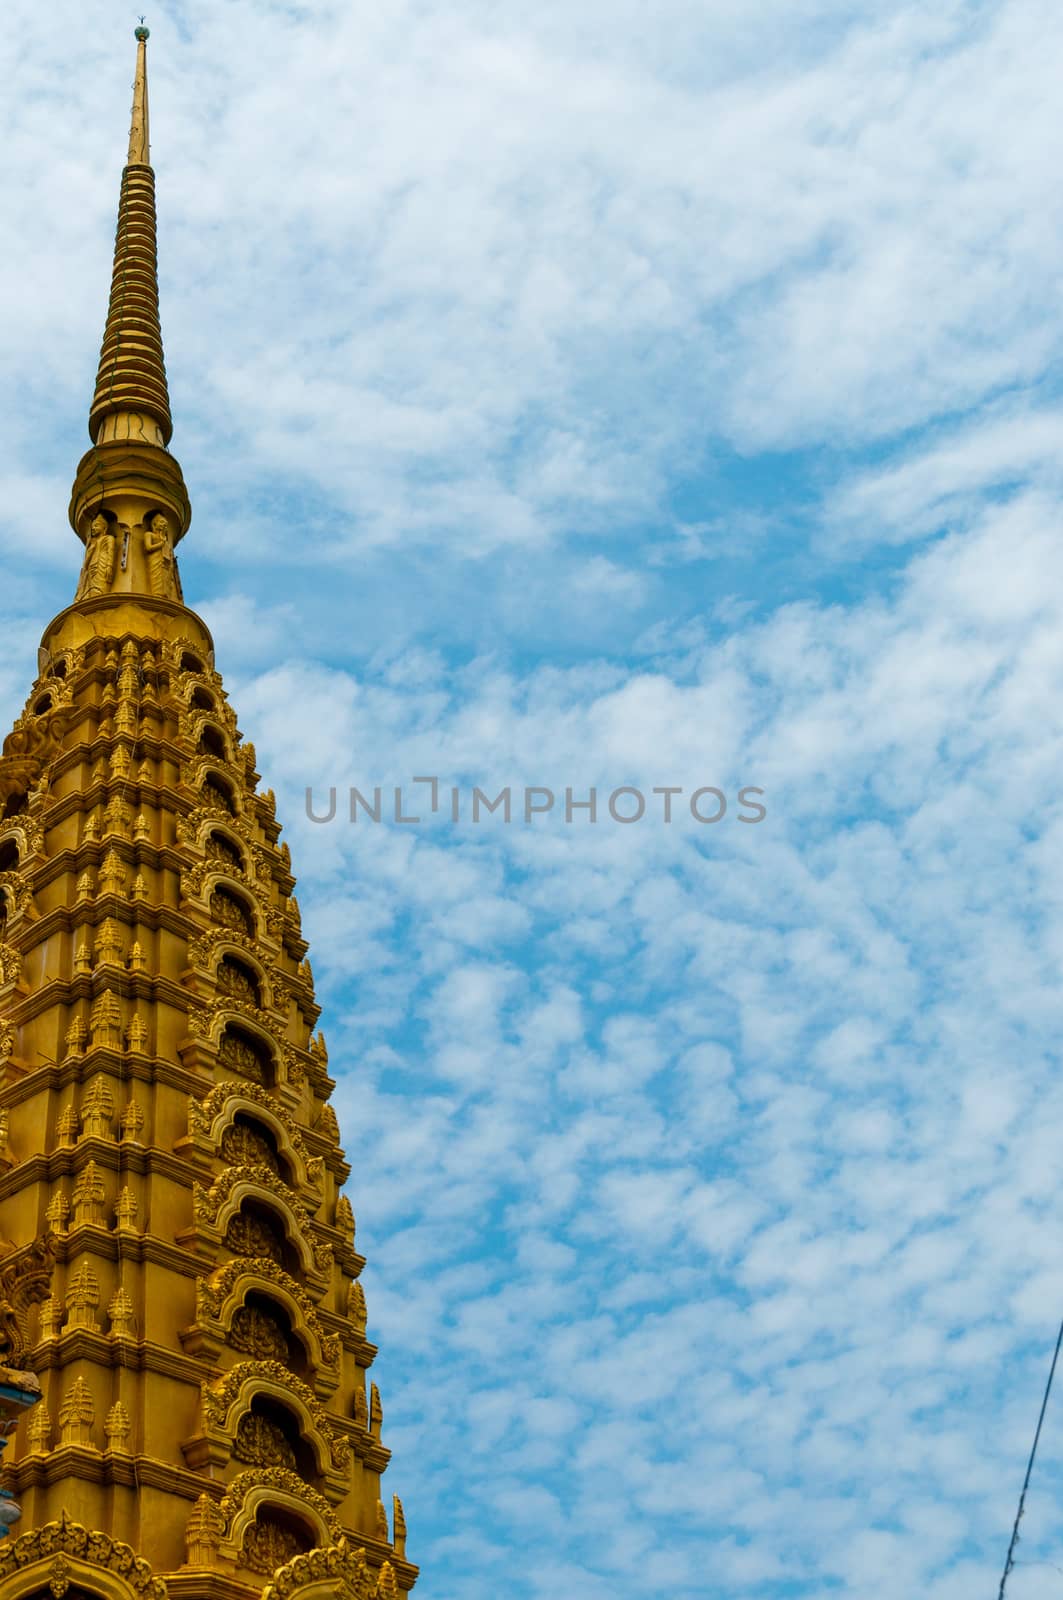 Golden Top in front of beautiful blue and cloudy sky in Asia